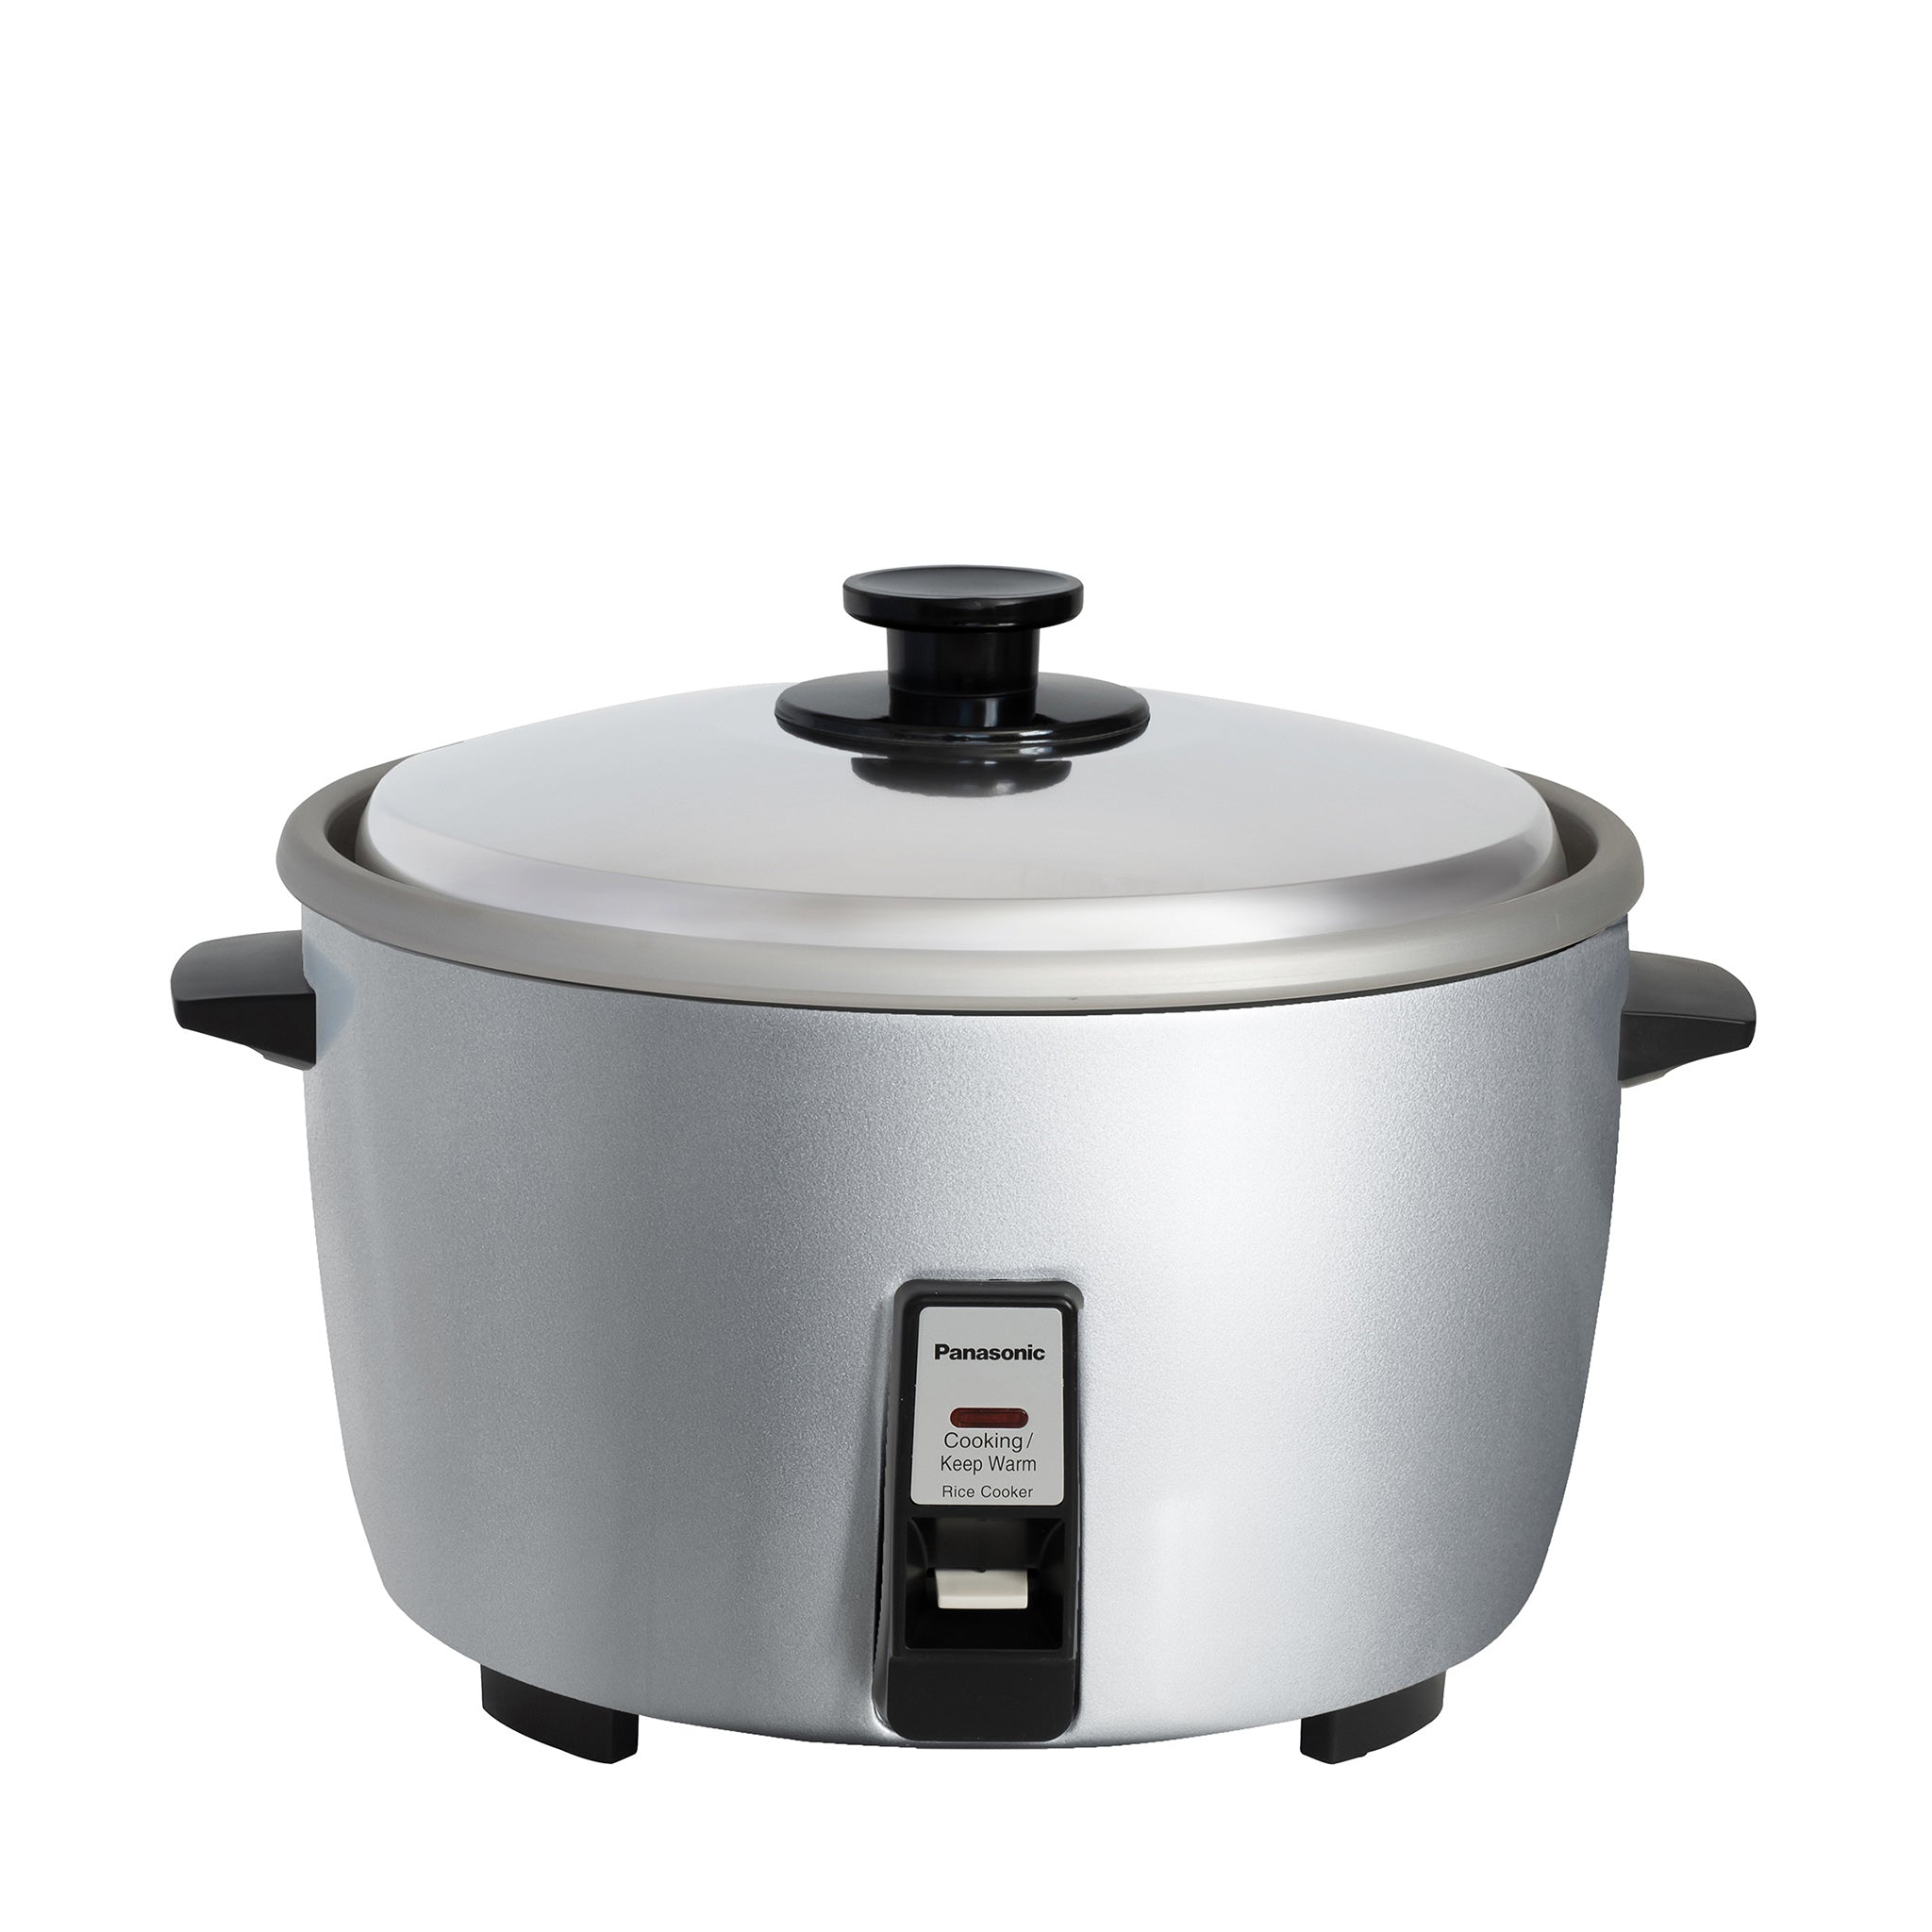 Rice/Grain Cooker - 3 Cup Uncooked Rice Capacity